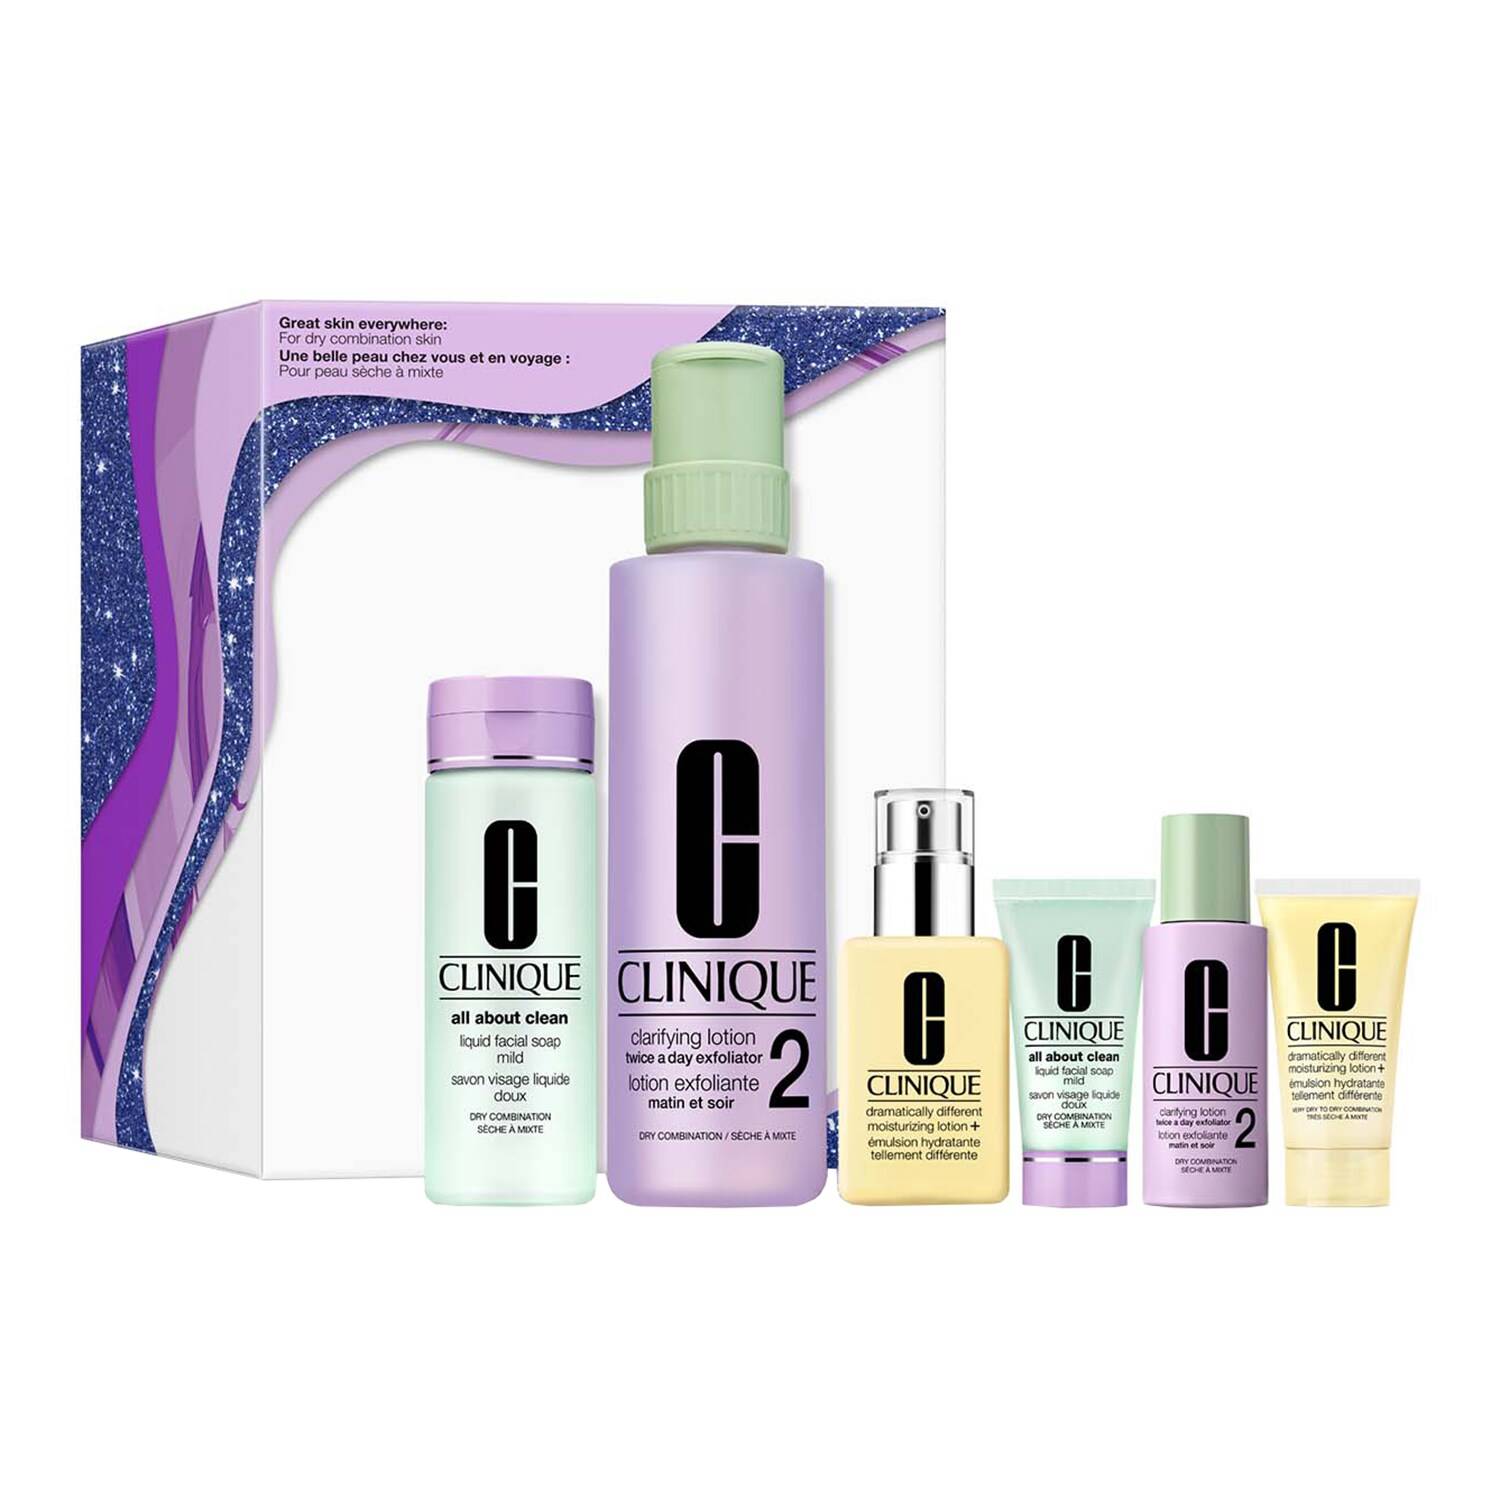 CLINIQUE Great Skin Everywhere Skincare Gift Set: For Dry Combination Skin